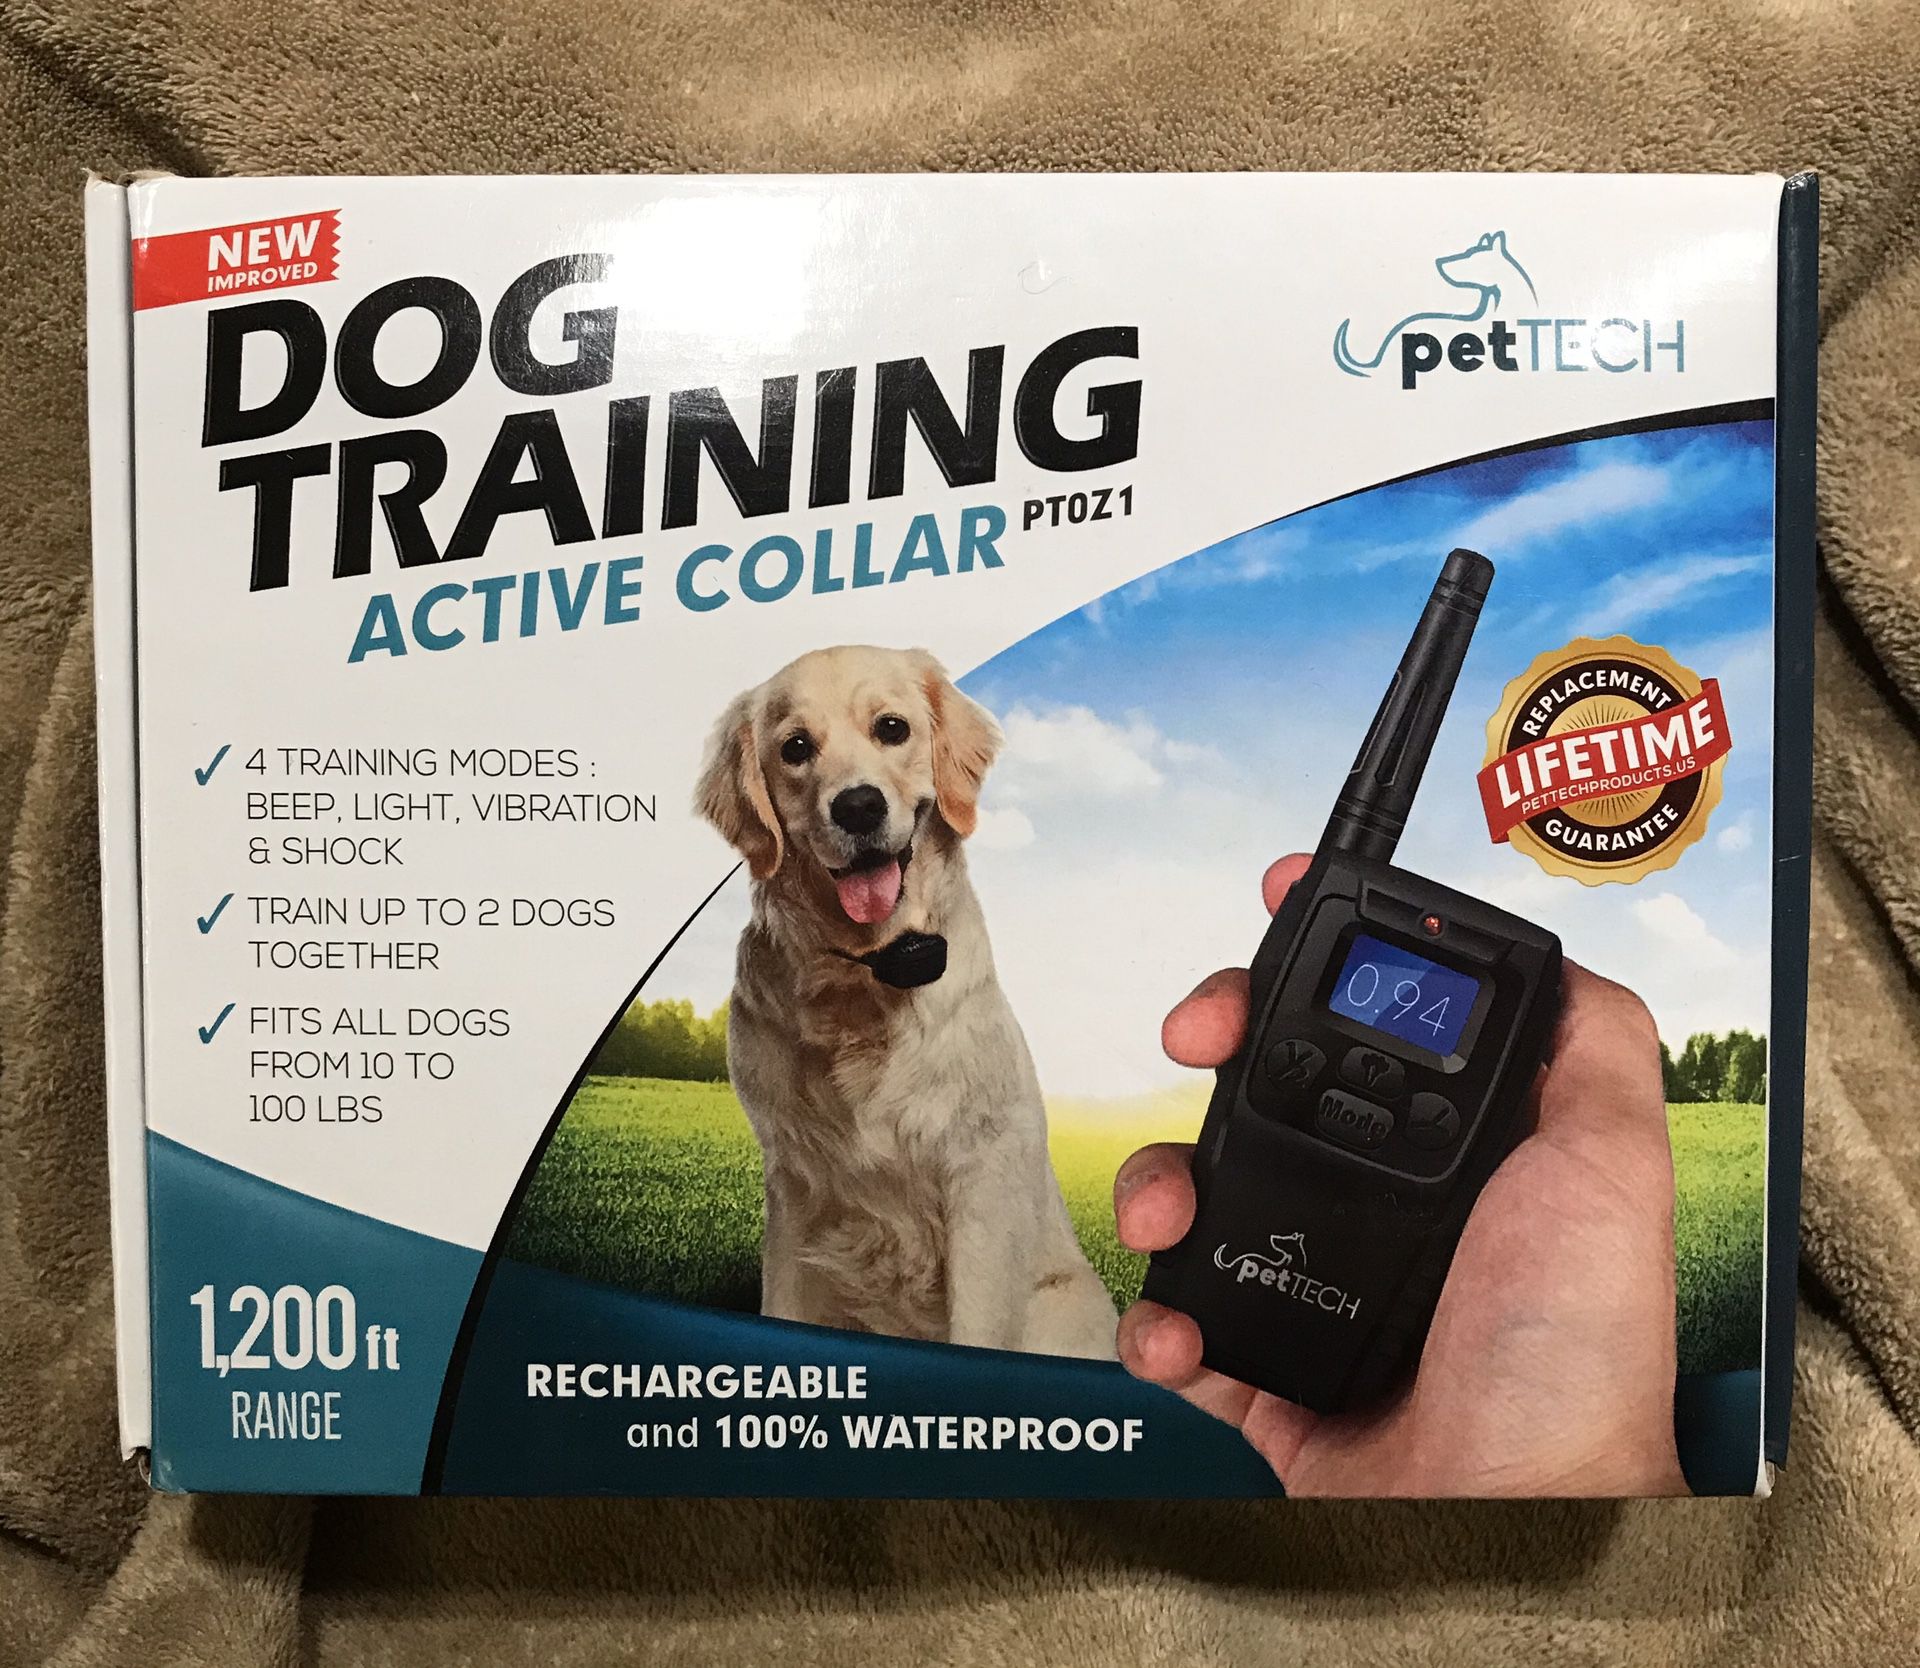 Pet Tech 4-Mode Dog Training Collar Fits Dogs from 10 to 100lbs